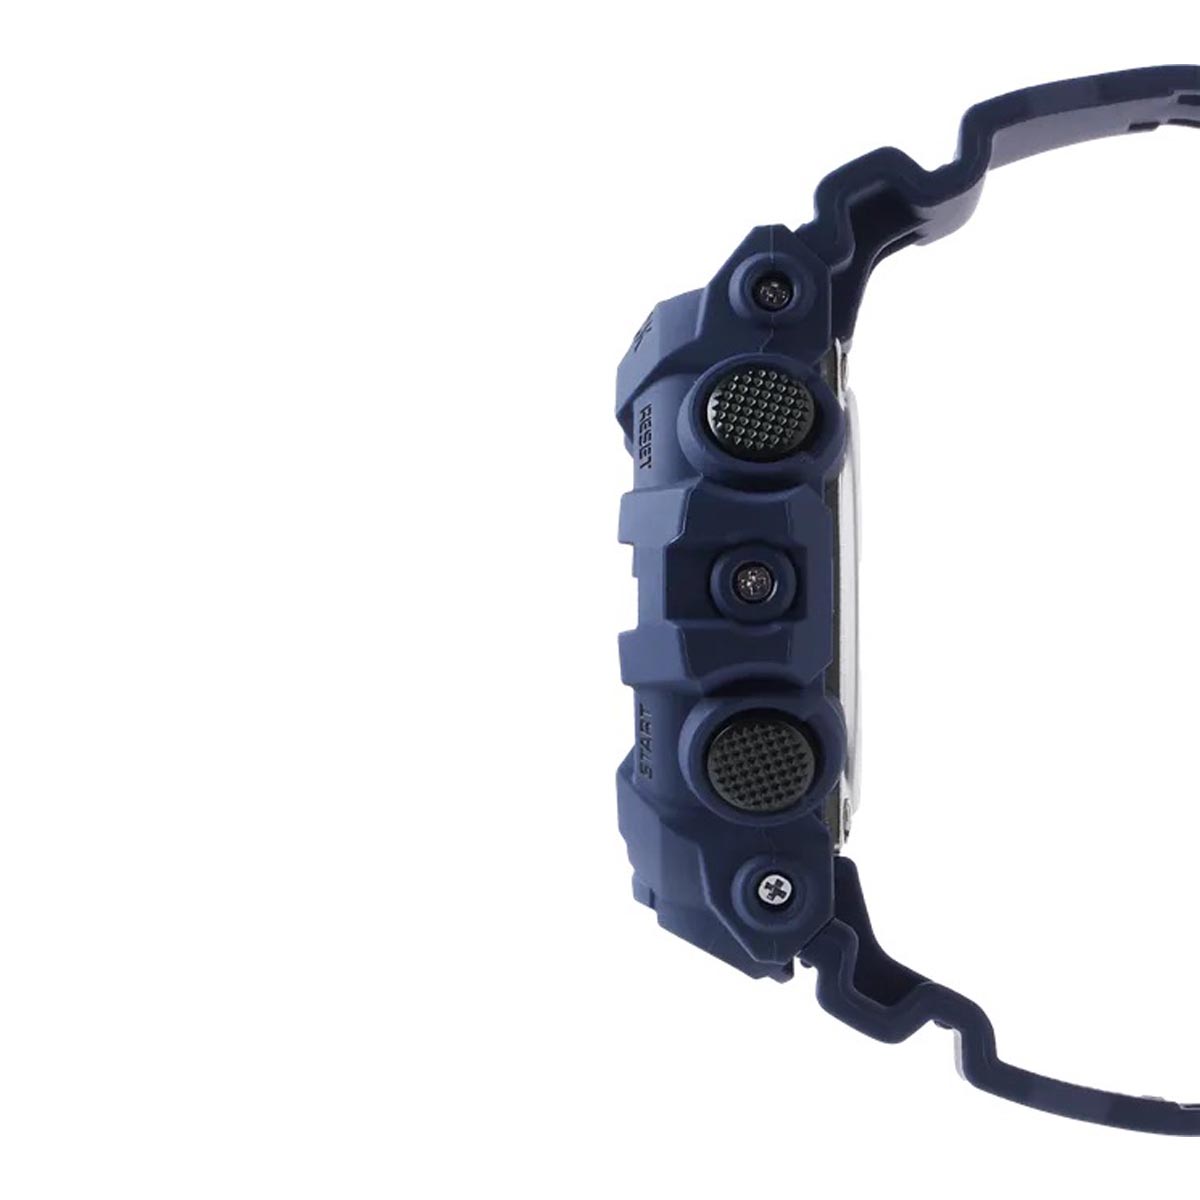 G Shock Mens Watch with Grey Dial and Blue Resin Strap (quartz movement)